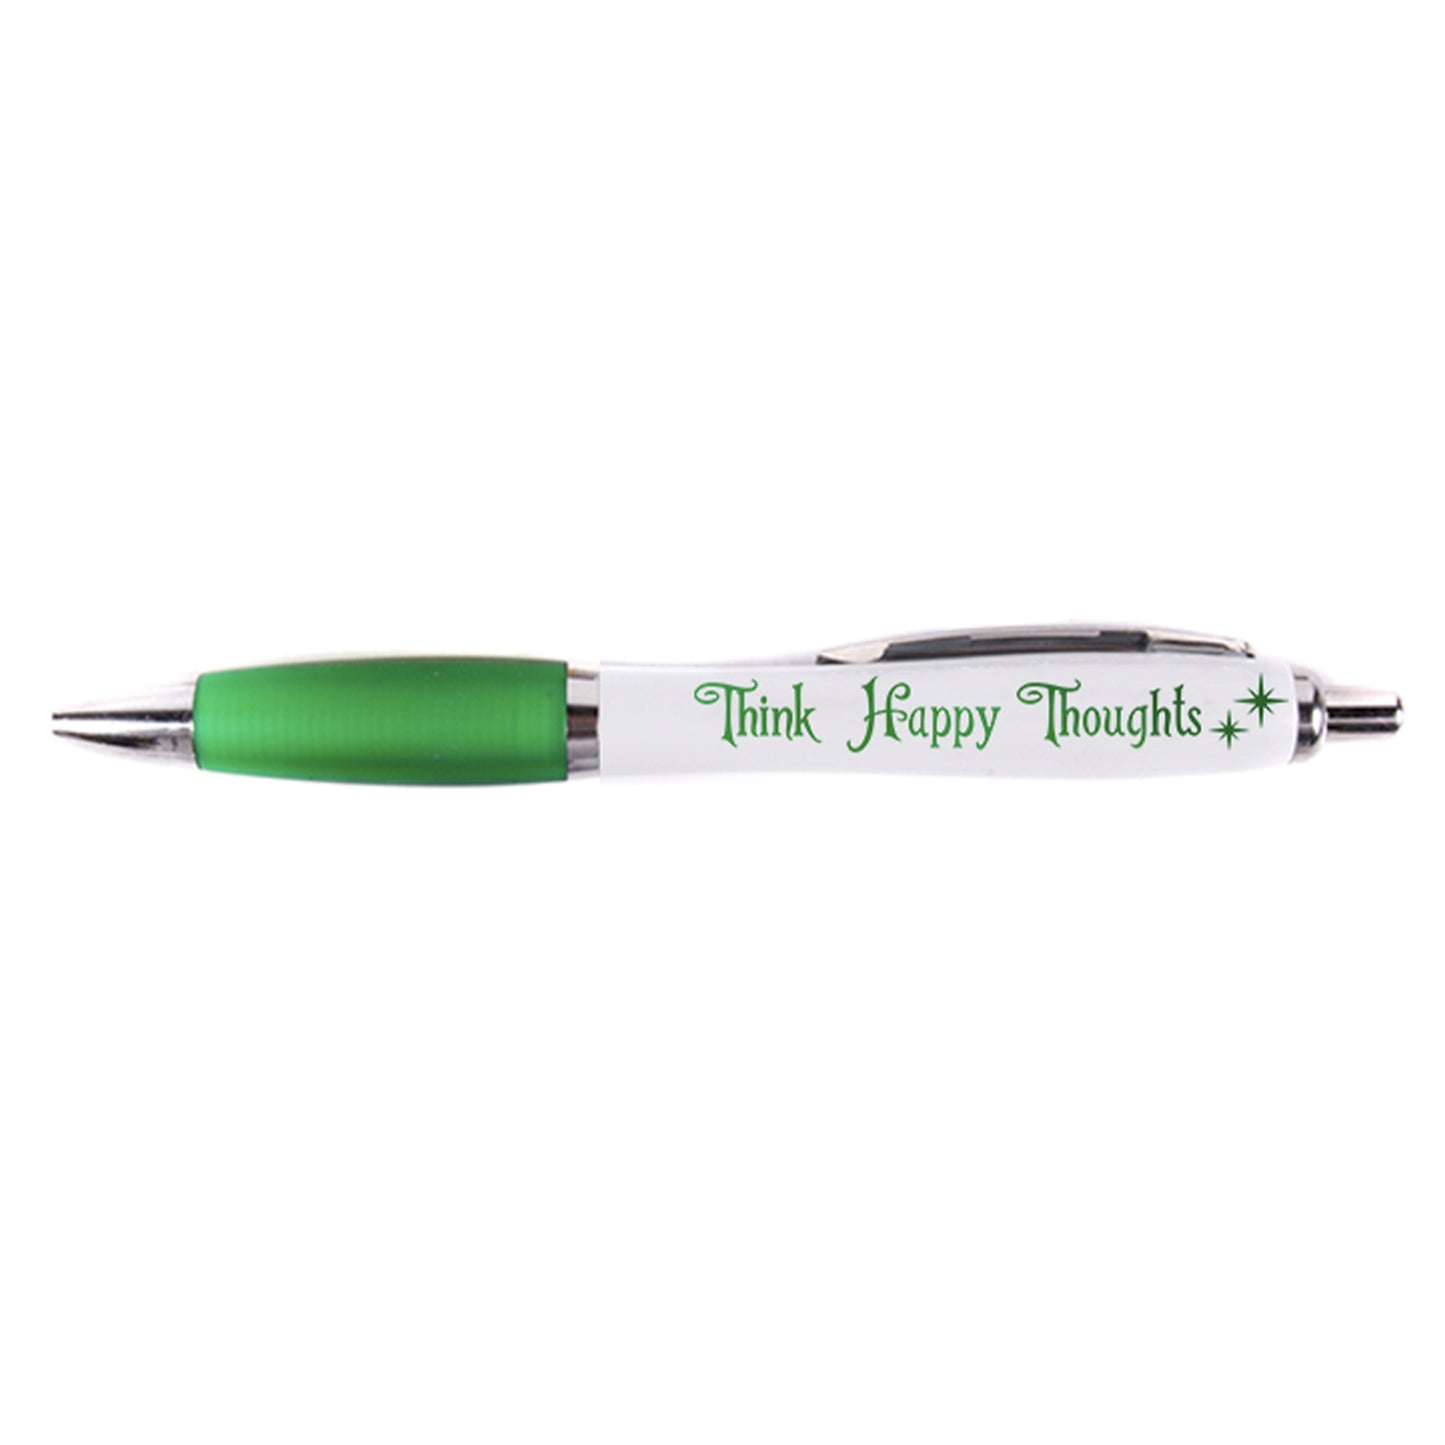 Think Happy Thoughts Pen